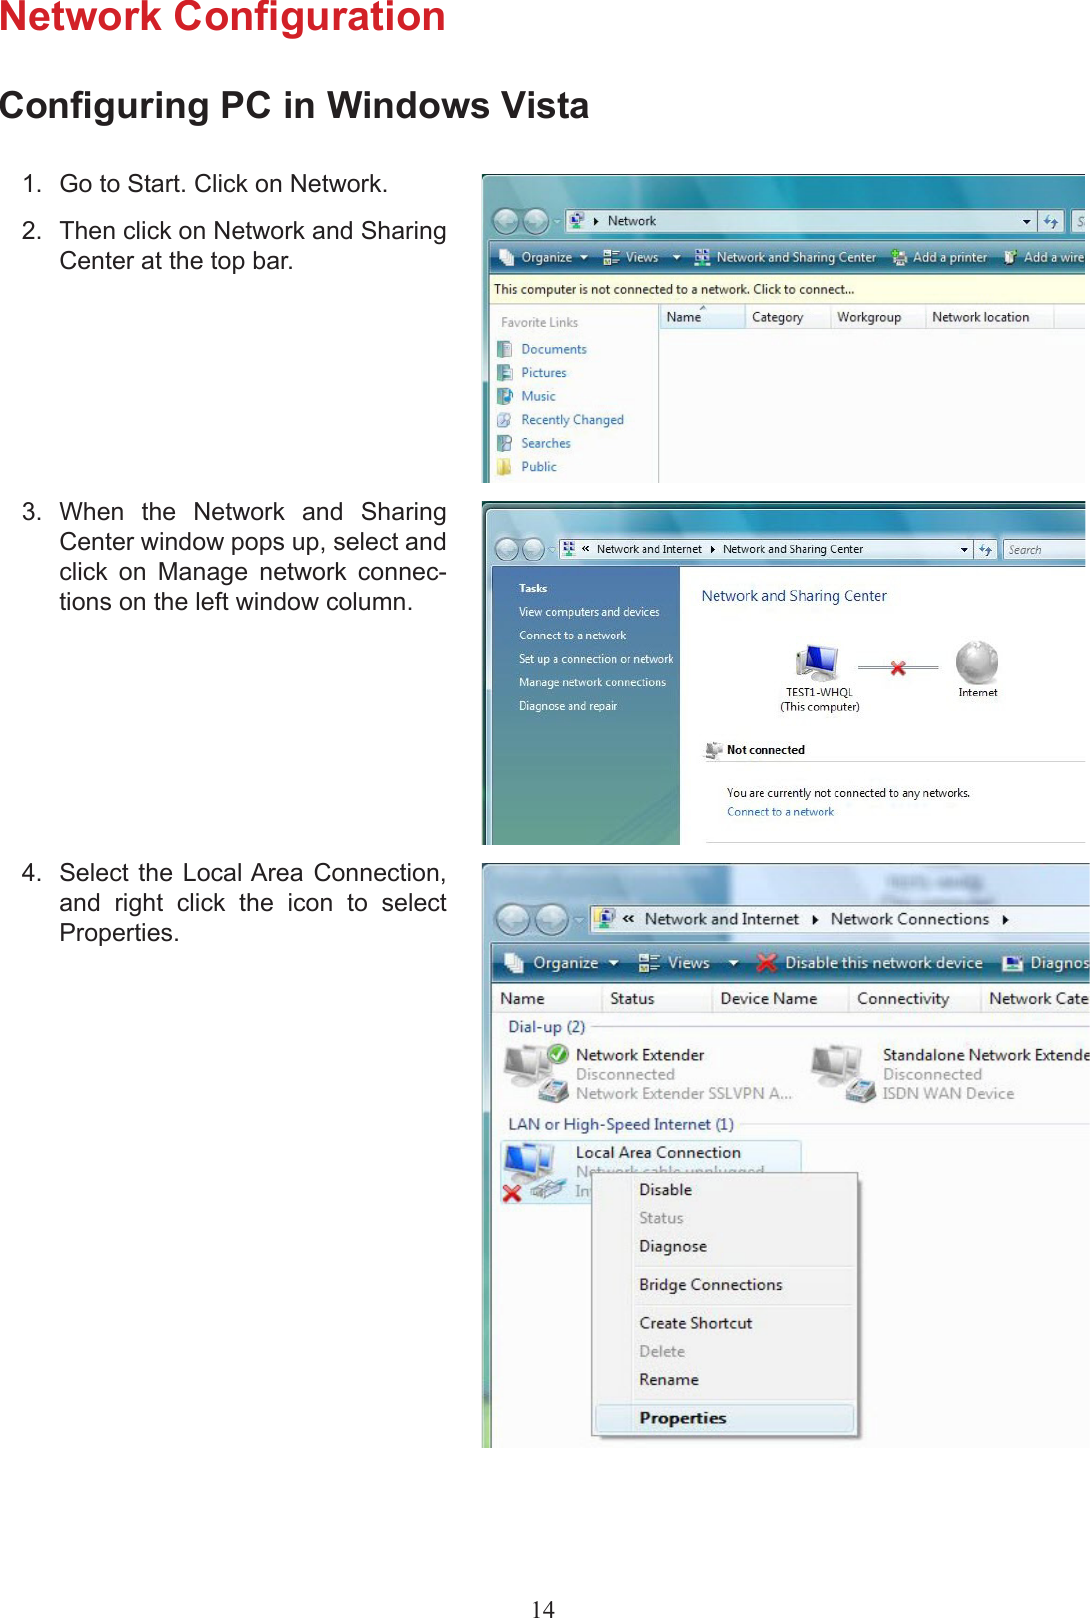 Network CongurationConguring PC in Windows Vista1.  Go to Start. Click on Network.2.  Then click on Network and Sharing Center at the top bar.3.  When  the  Network  and  Sharing Center window pops up, select and click  on  Manage  network  connec-tions on the left window column.4.  Select the Local Area Connection, and  right  click  the  icon  to  select Properties.14